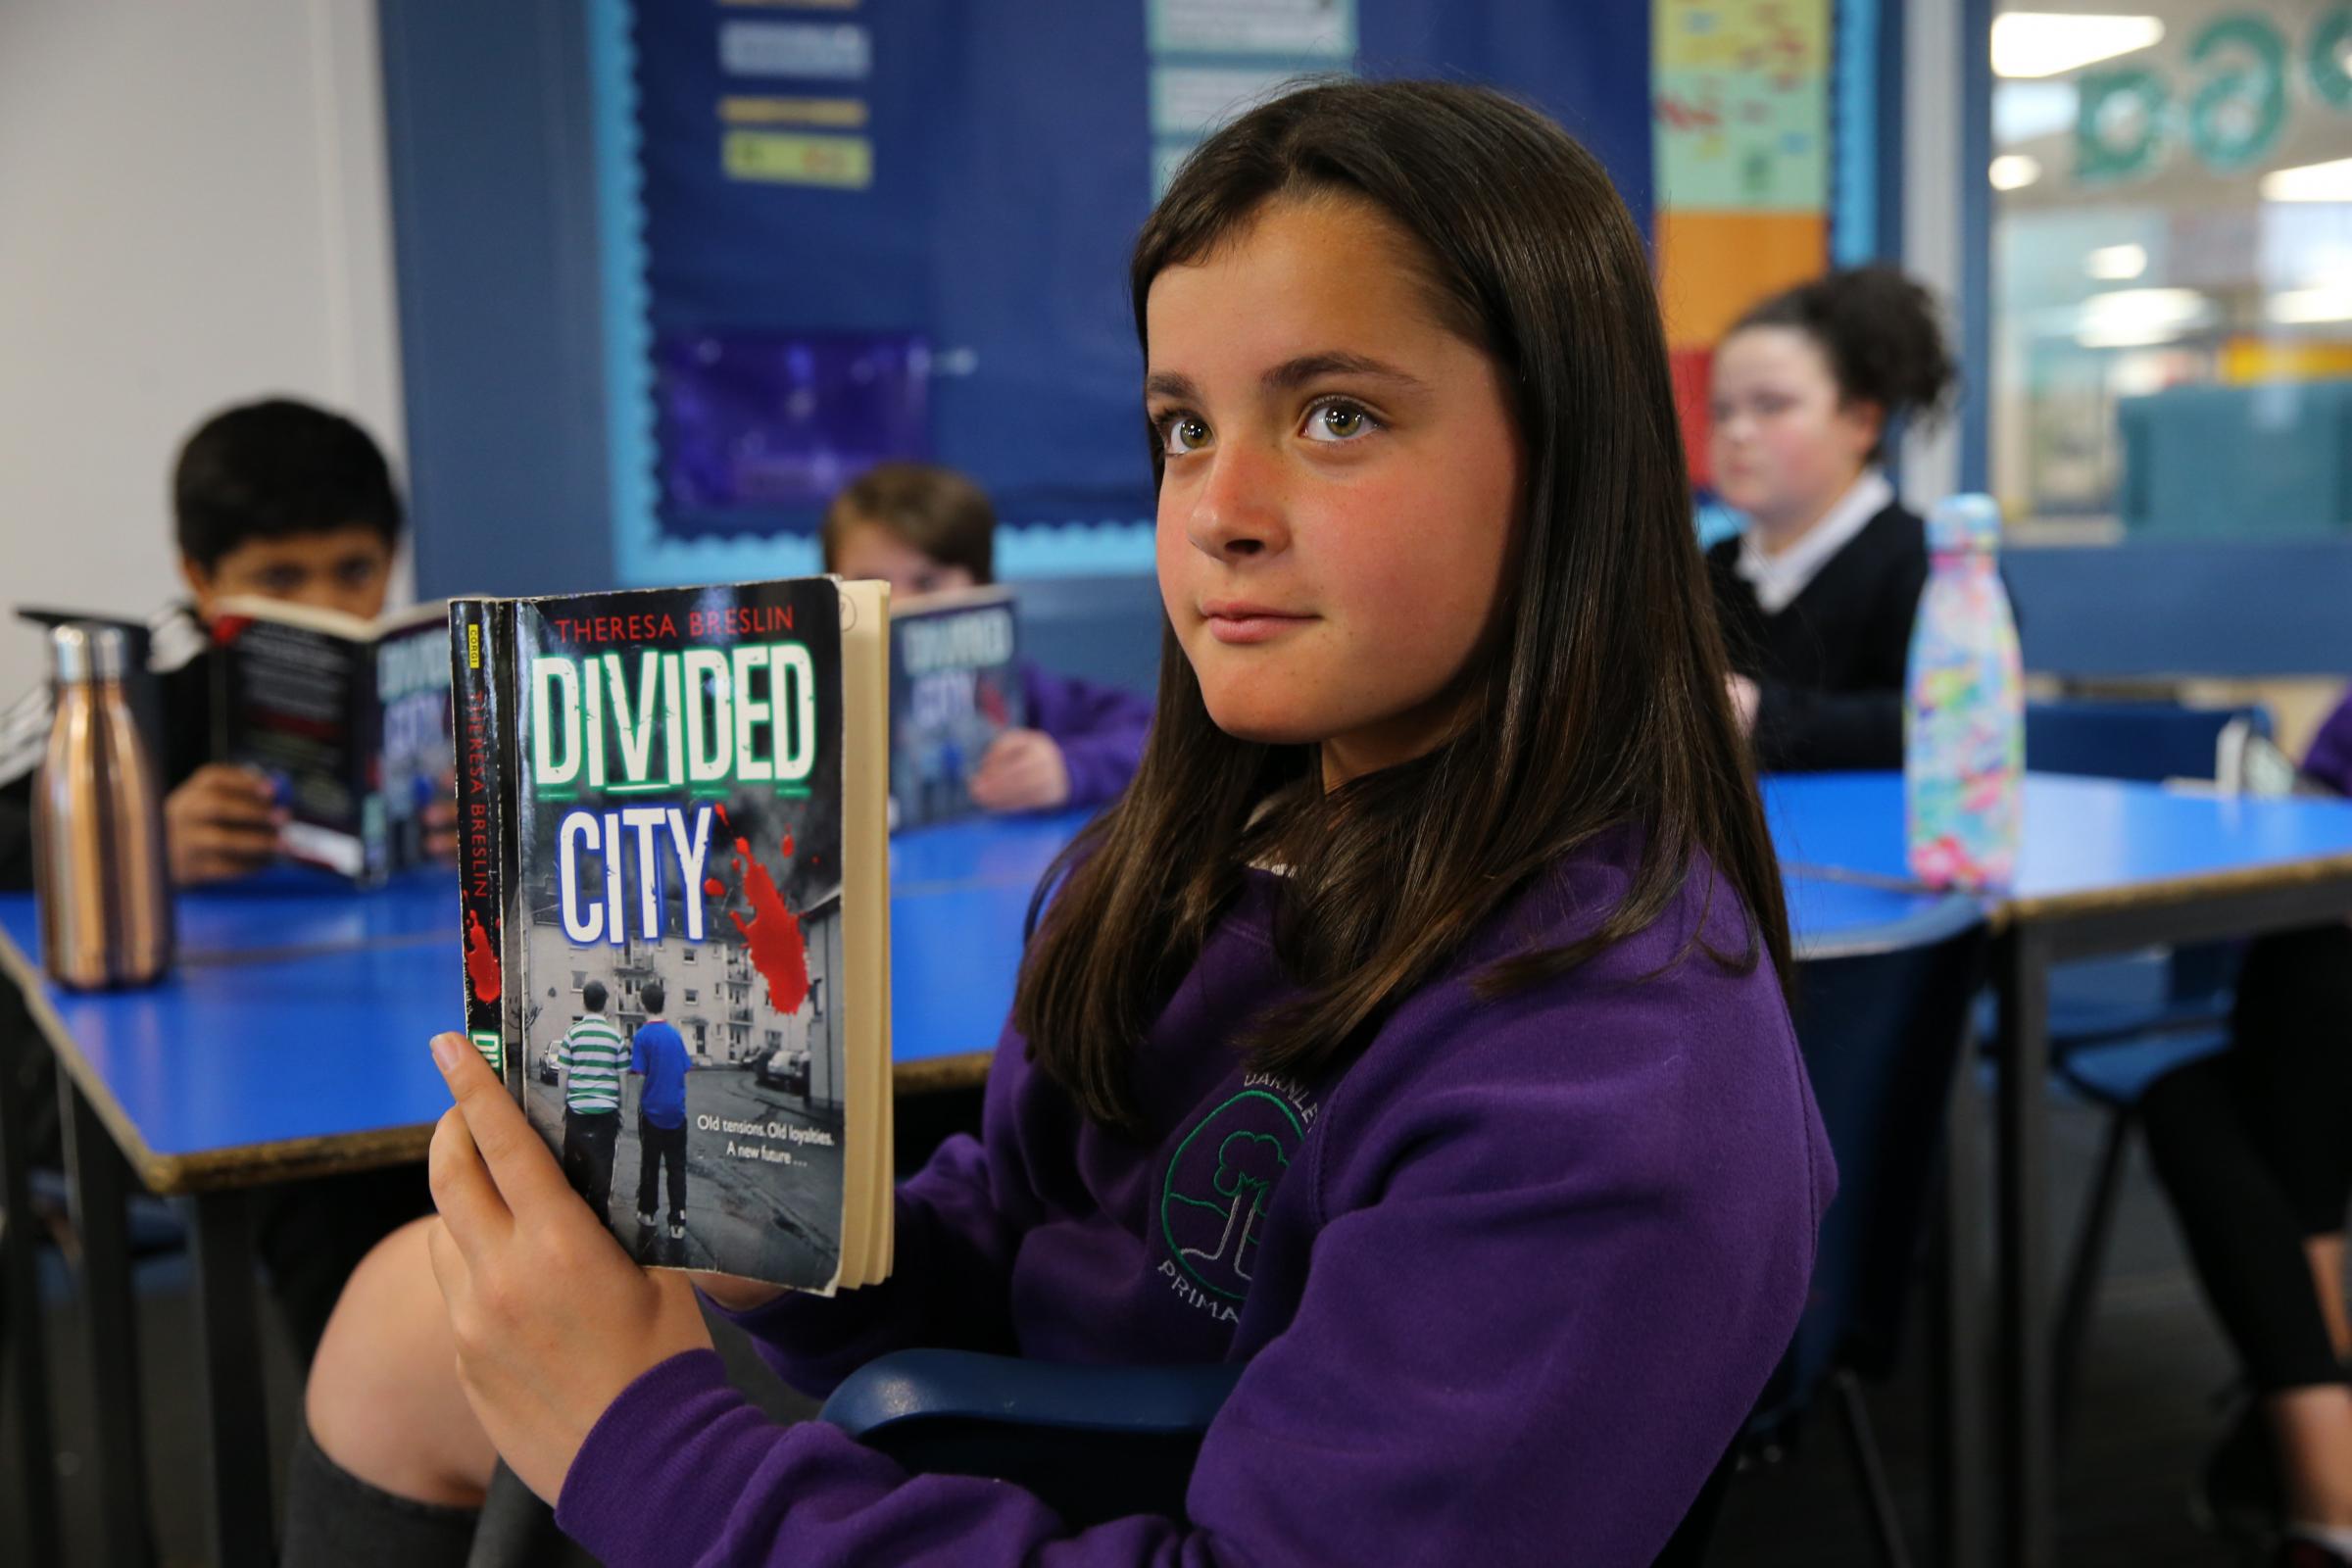 Darnley Primary school P6 pupil Abbie Watson with a copy of Divided City by Theresa Breslin Picture: Colin Mearns